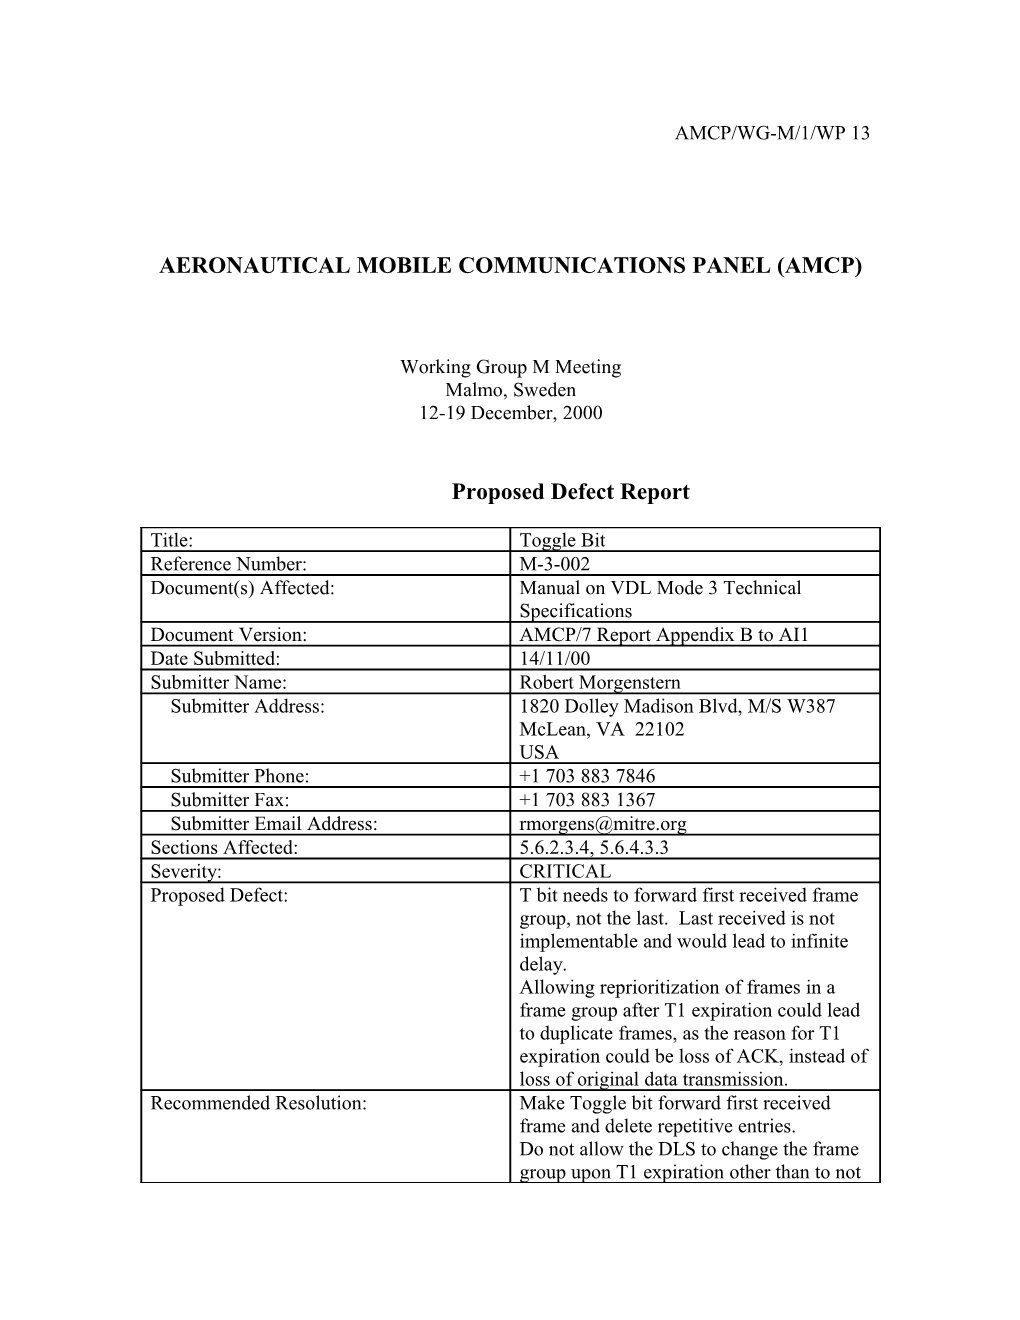 VDL Mode 3 Proposed Defect Report, Ref # M-3-002, Toggle Bit